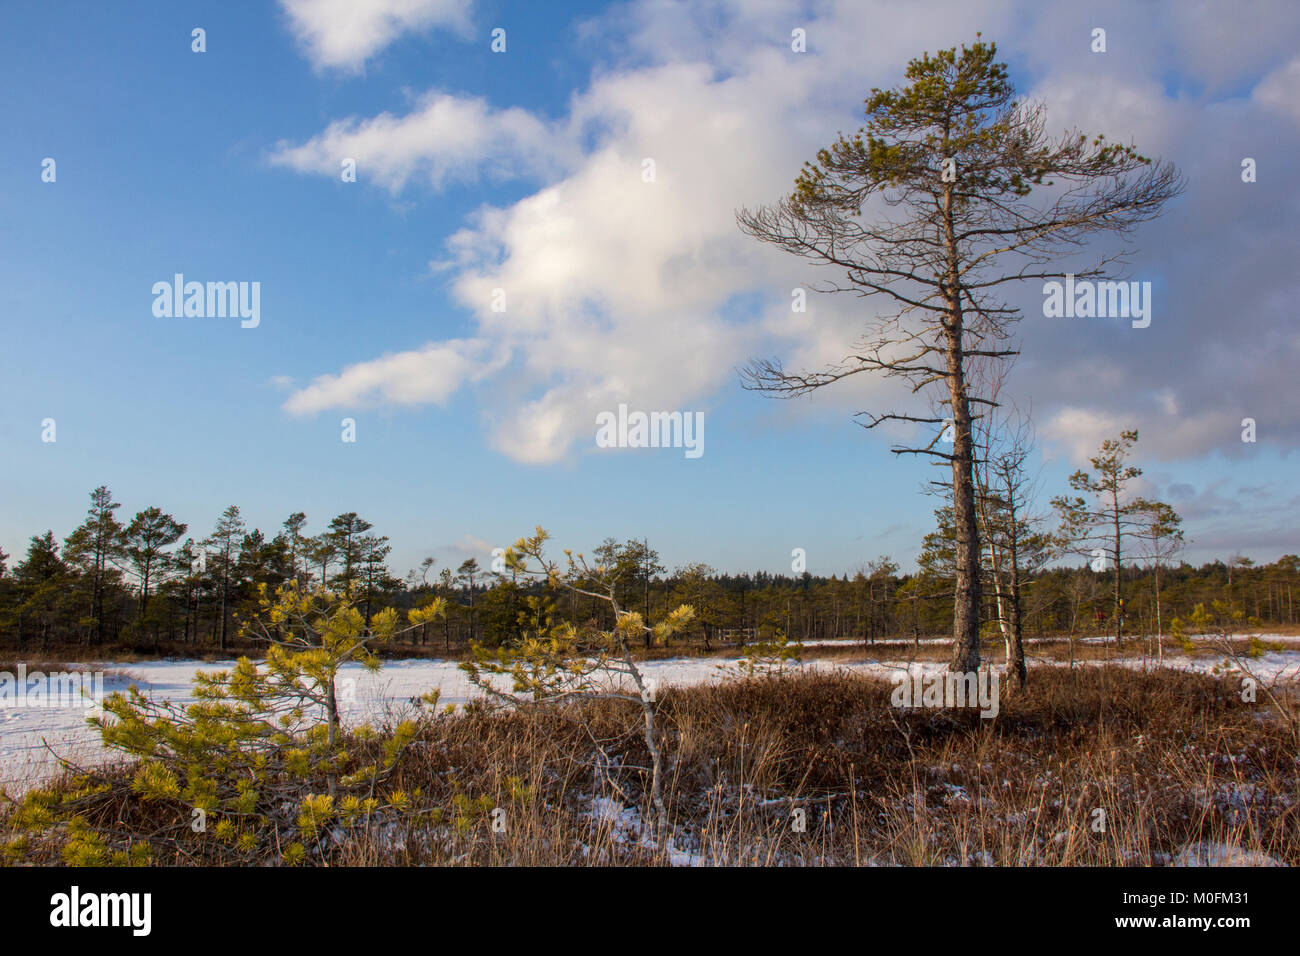 Kemeri national park Latvia in winter. Snowy winter day at swamp. Small swamp trees.Travel concept. Stock Photo